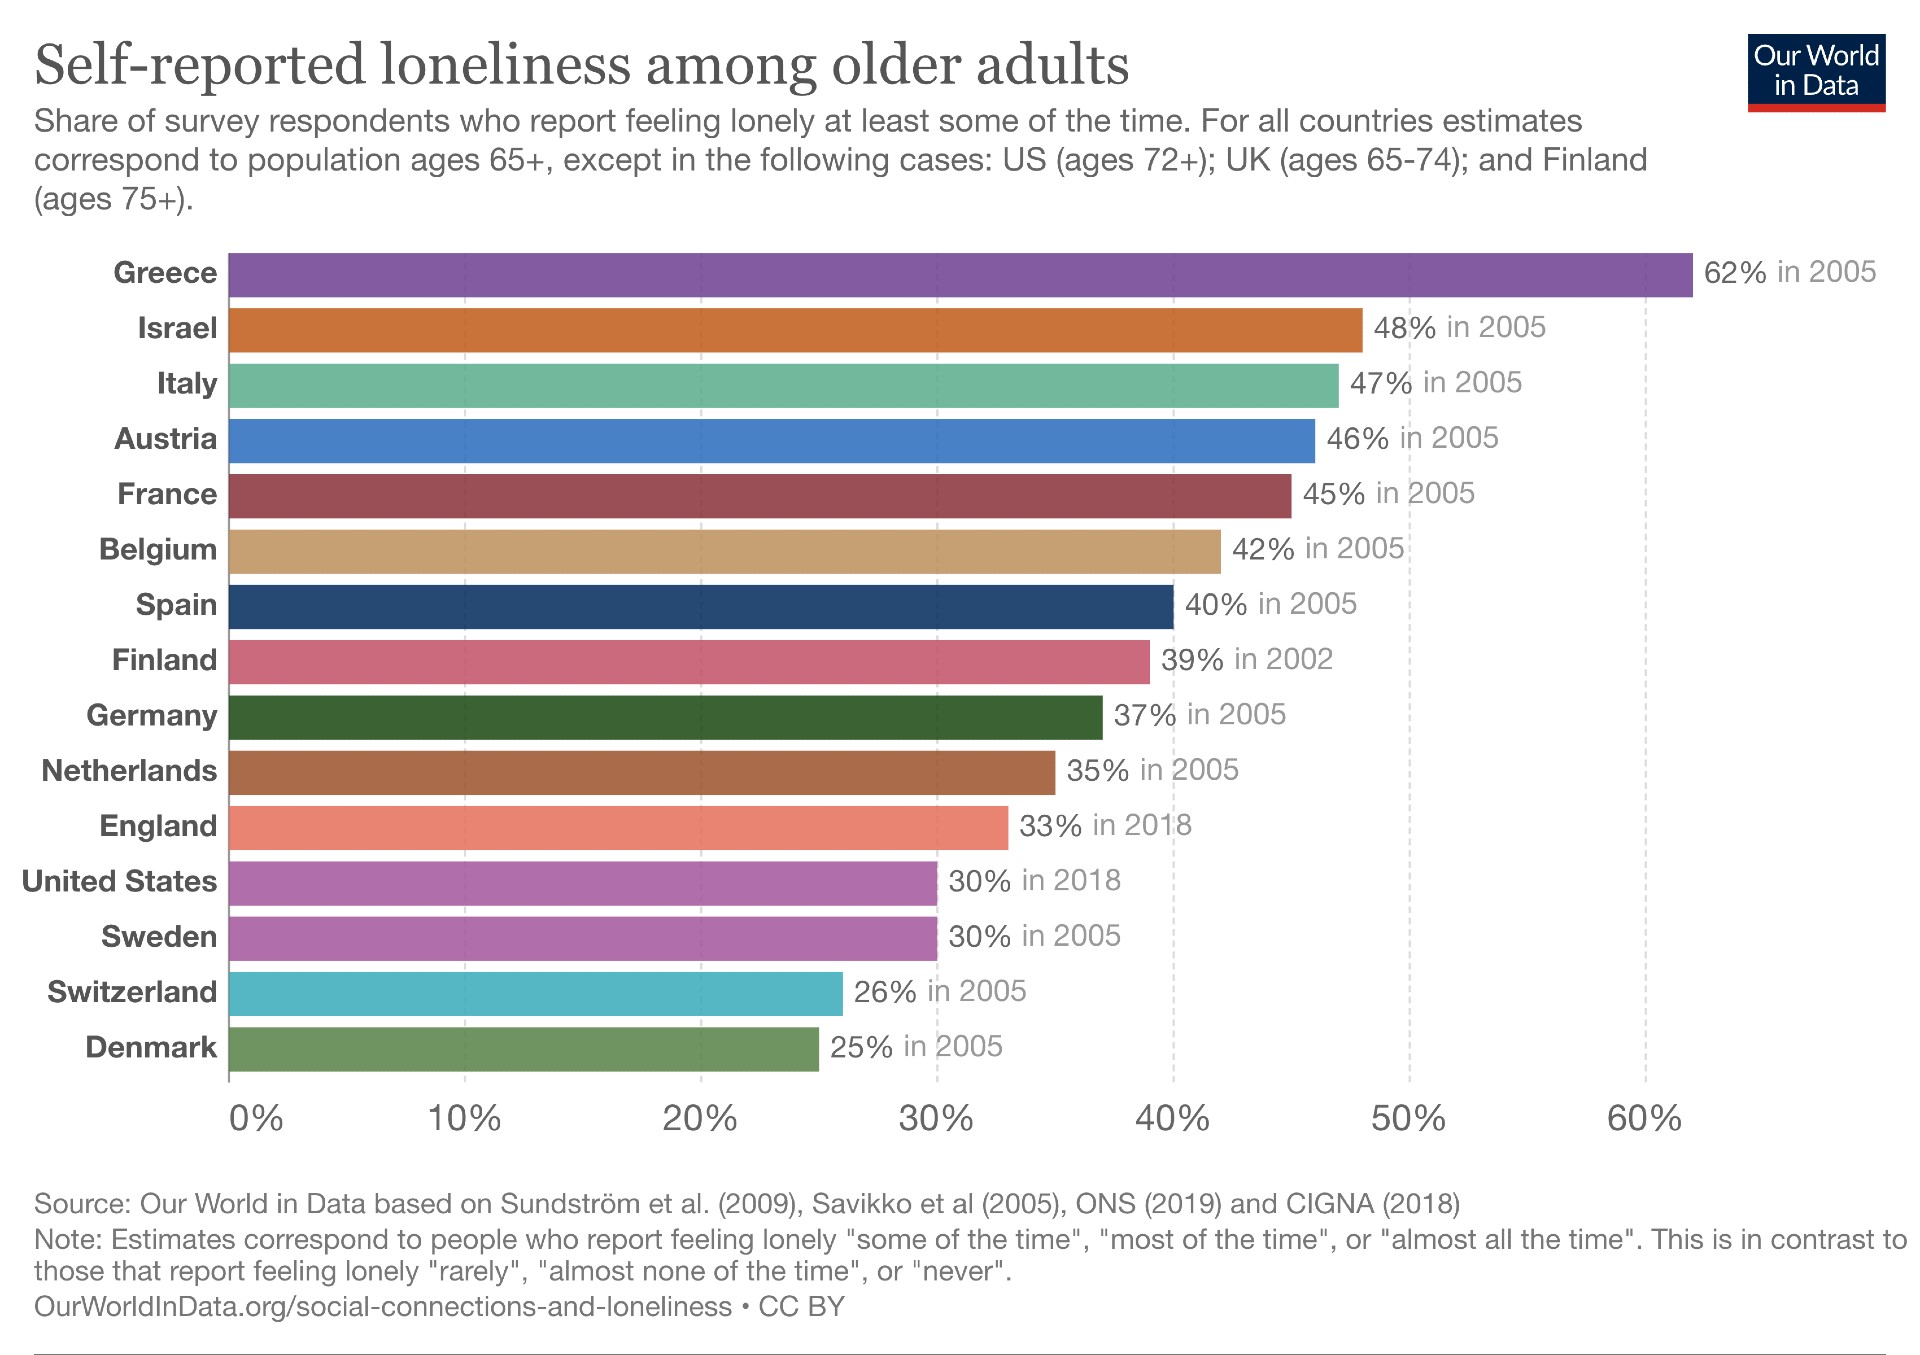 A bar chart showing the percentage of self-reported loneness among older adults.